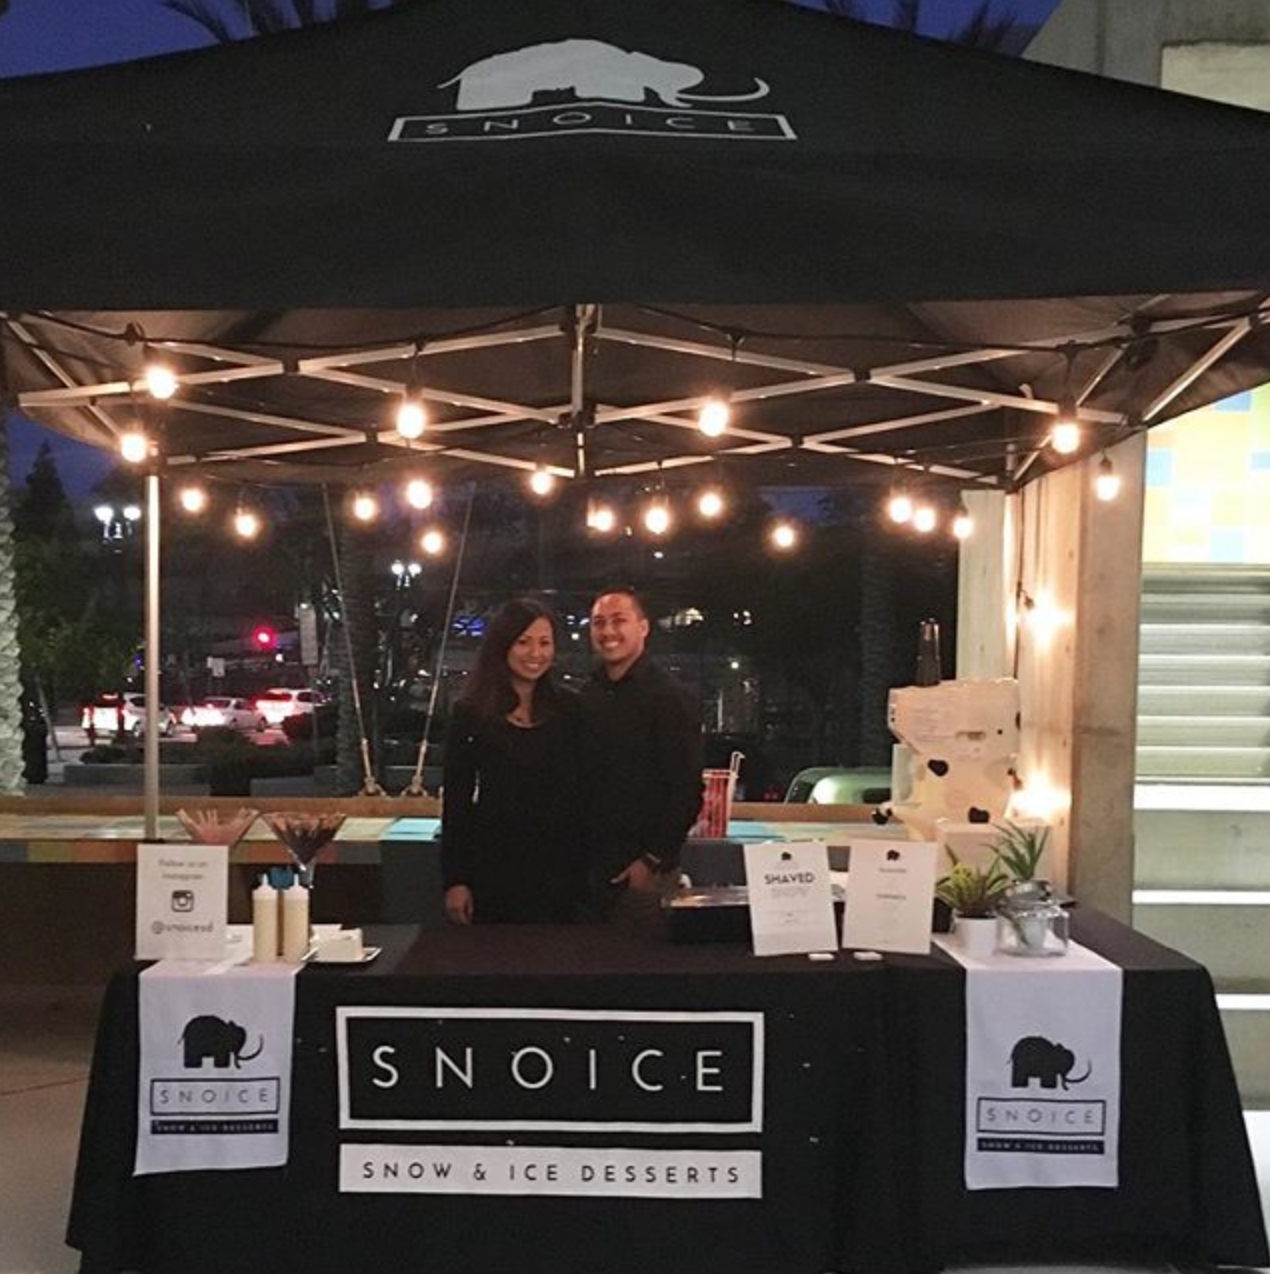  (1/2) Here's a canopy set-up we had when we served shaved snow at a wedding in early 2016.&nbsp; 